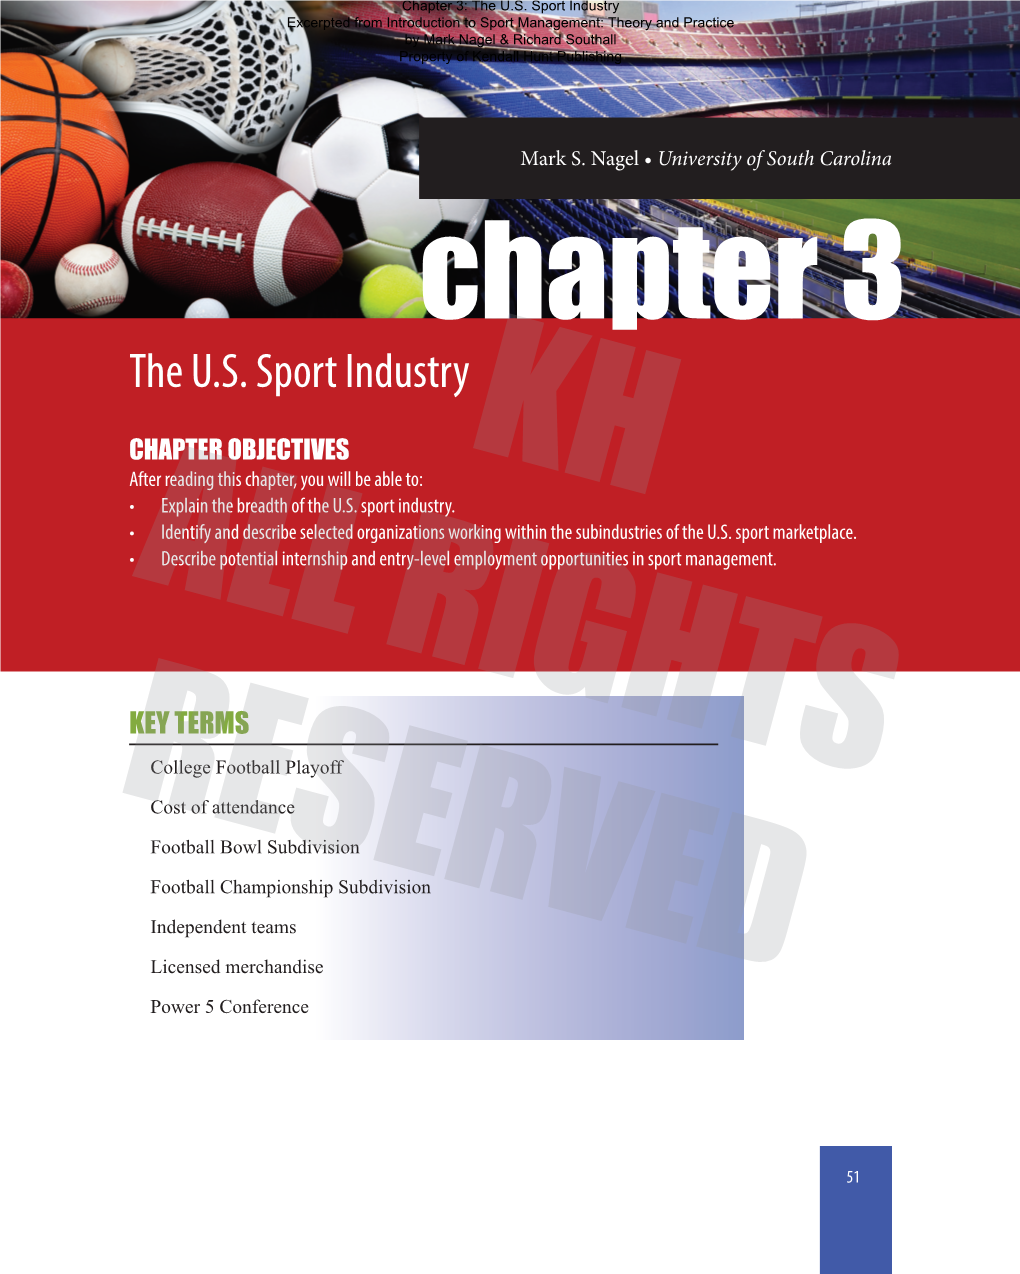 The U.S. Sport Industry Excerpted from Introduction to Sport Management: Theory and Practice by Mark Nagel & Richard Southall Property of Kendall Hunt Publishing